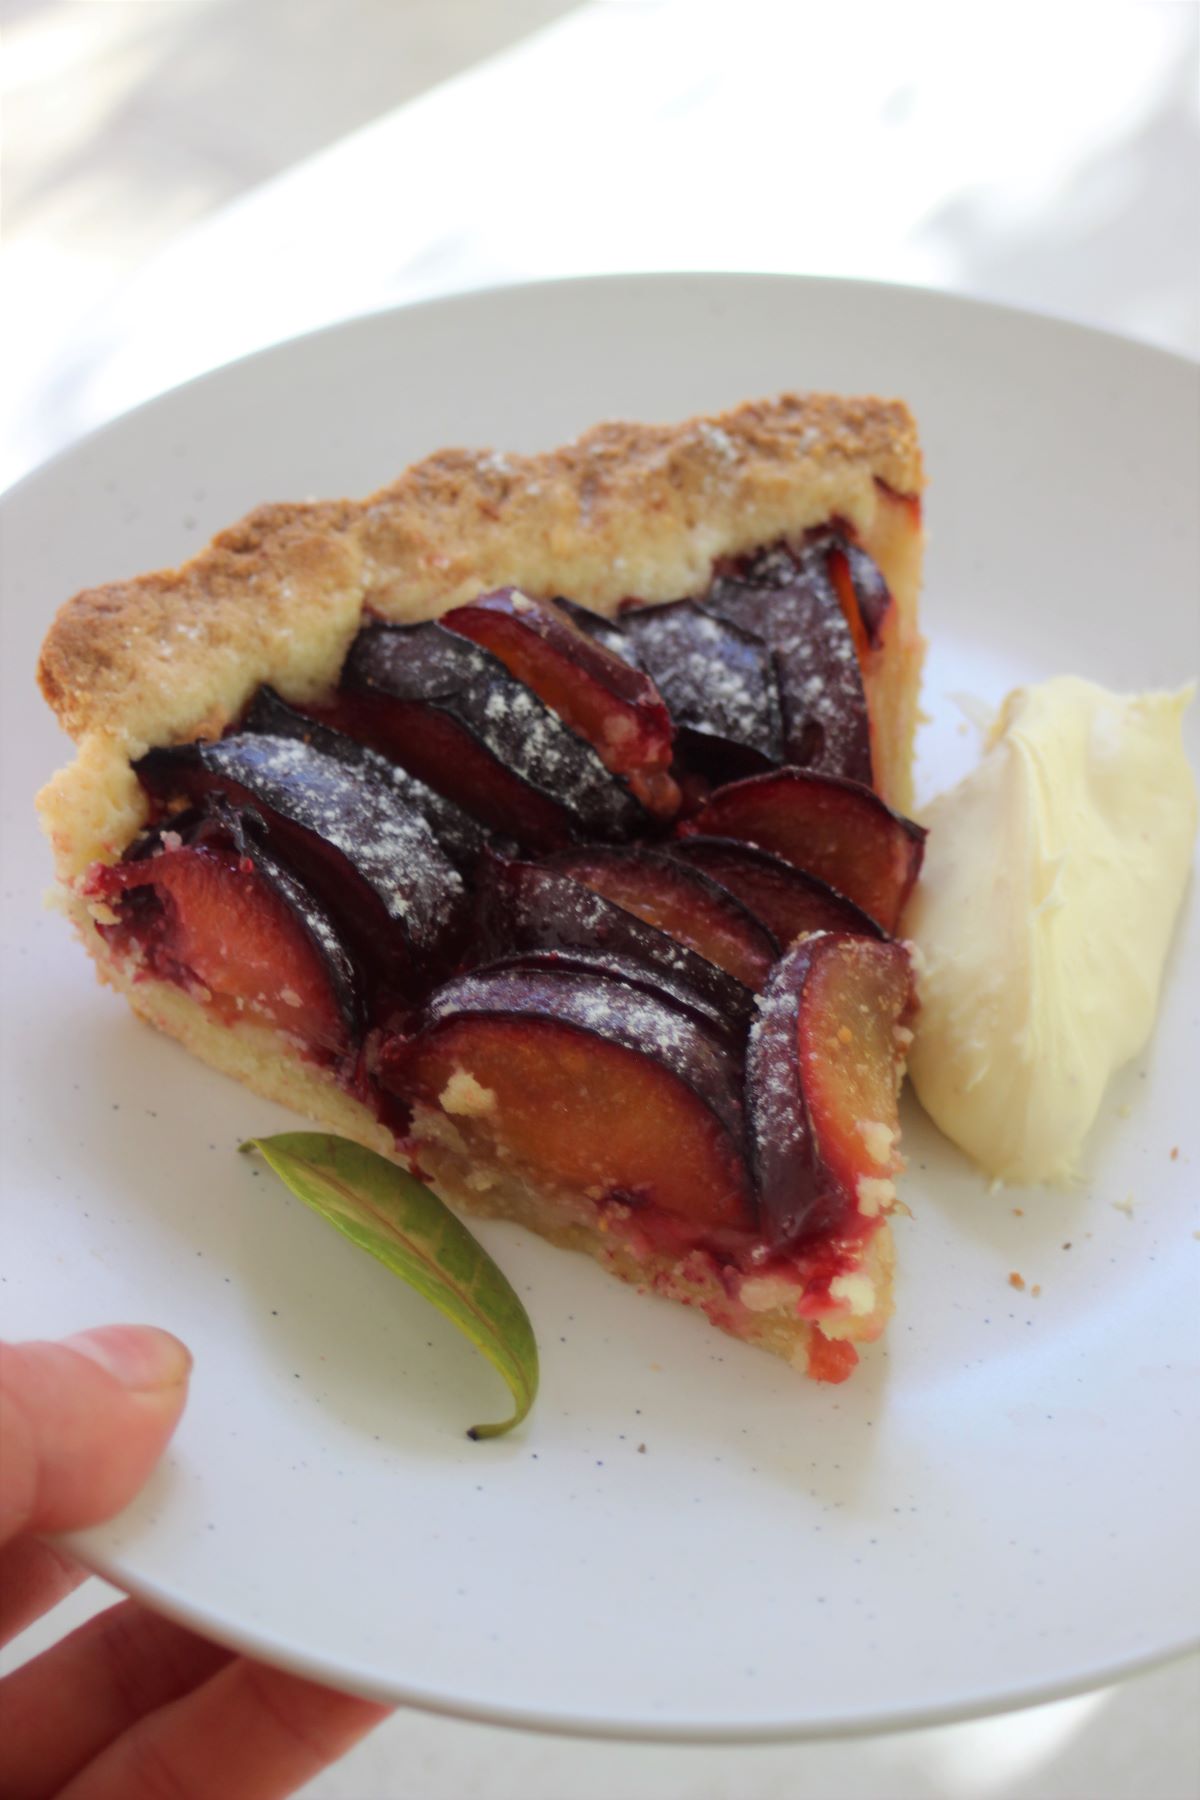 Portion of plum tart with whipped cream on a white plate.